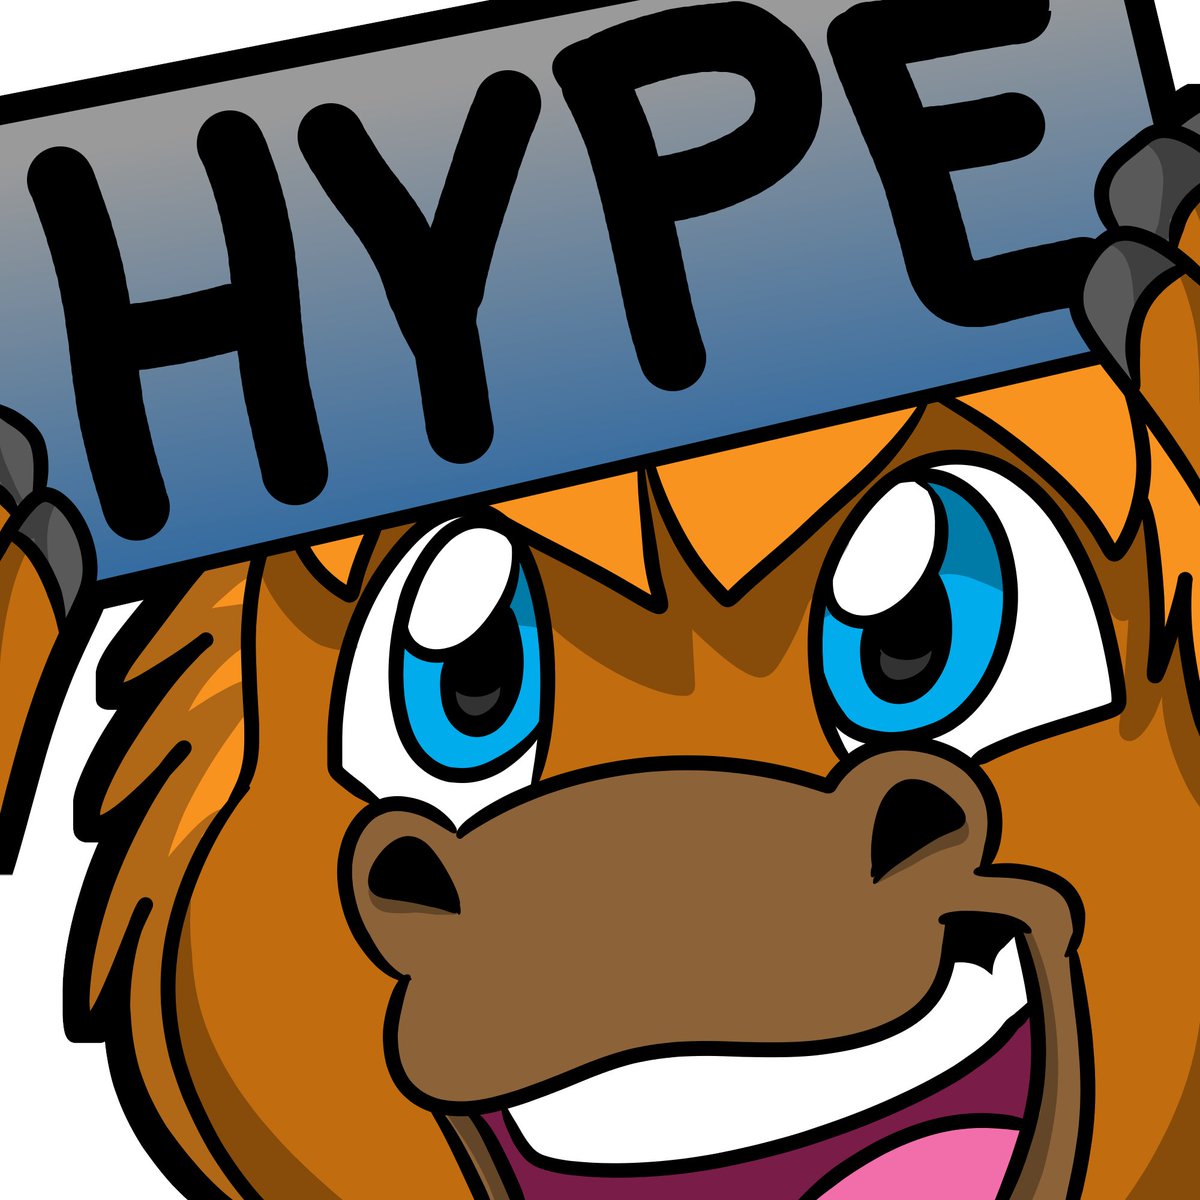 HYPE Emote complete for Steampony! I love the variety of mascots I get to work with 🥹